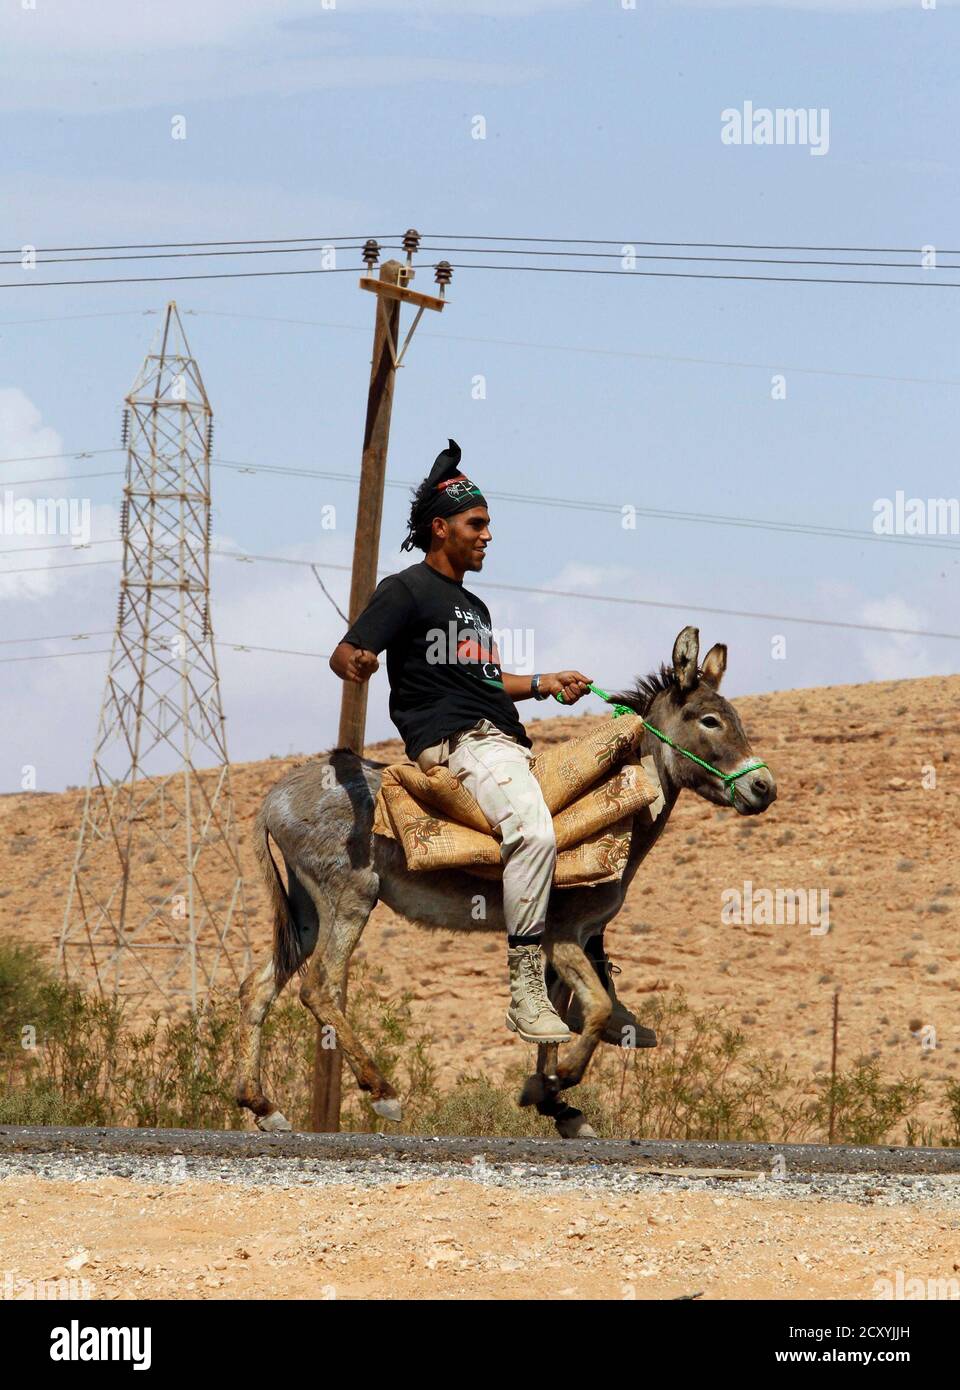 An anti-Gaddafi fighter rides a donkey at a checkpoint near Bani Walid  September 29, 2011. REUTERS/Saad Salash (LIBYA - Tags: ANIMALS TPX IMAGES  OF THE DAY POLITICS CIVIL UNREST MILITARY CONFLICT Stock